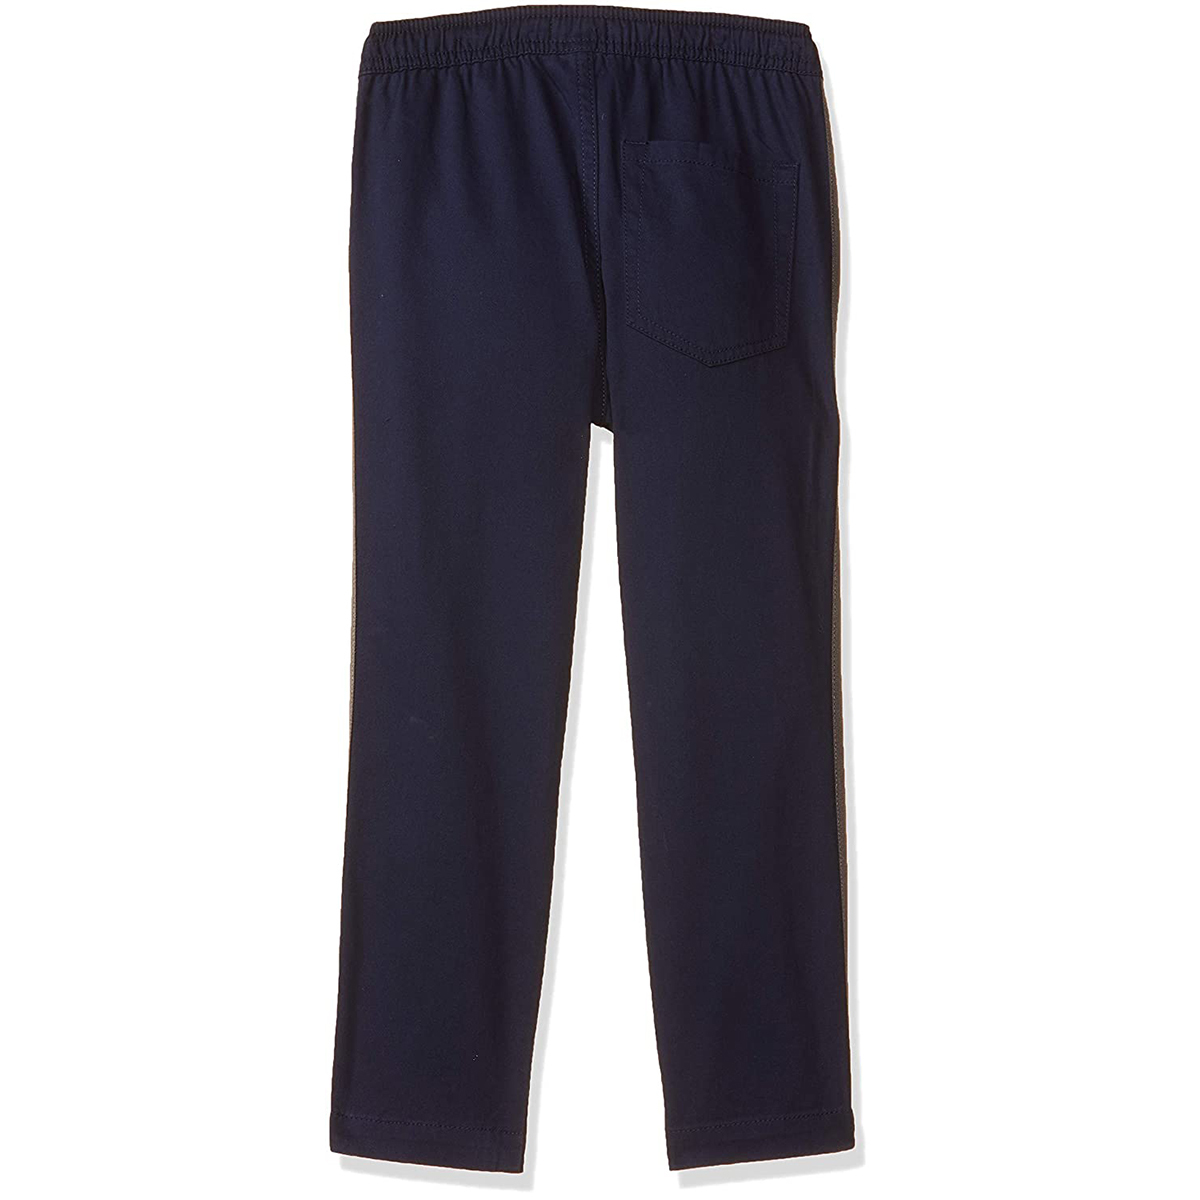 United Colors of Benetton Boy's Regular Fit Casual Pants- Navy Blue